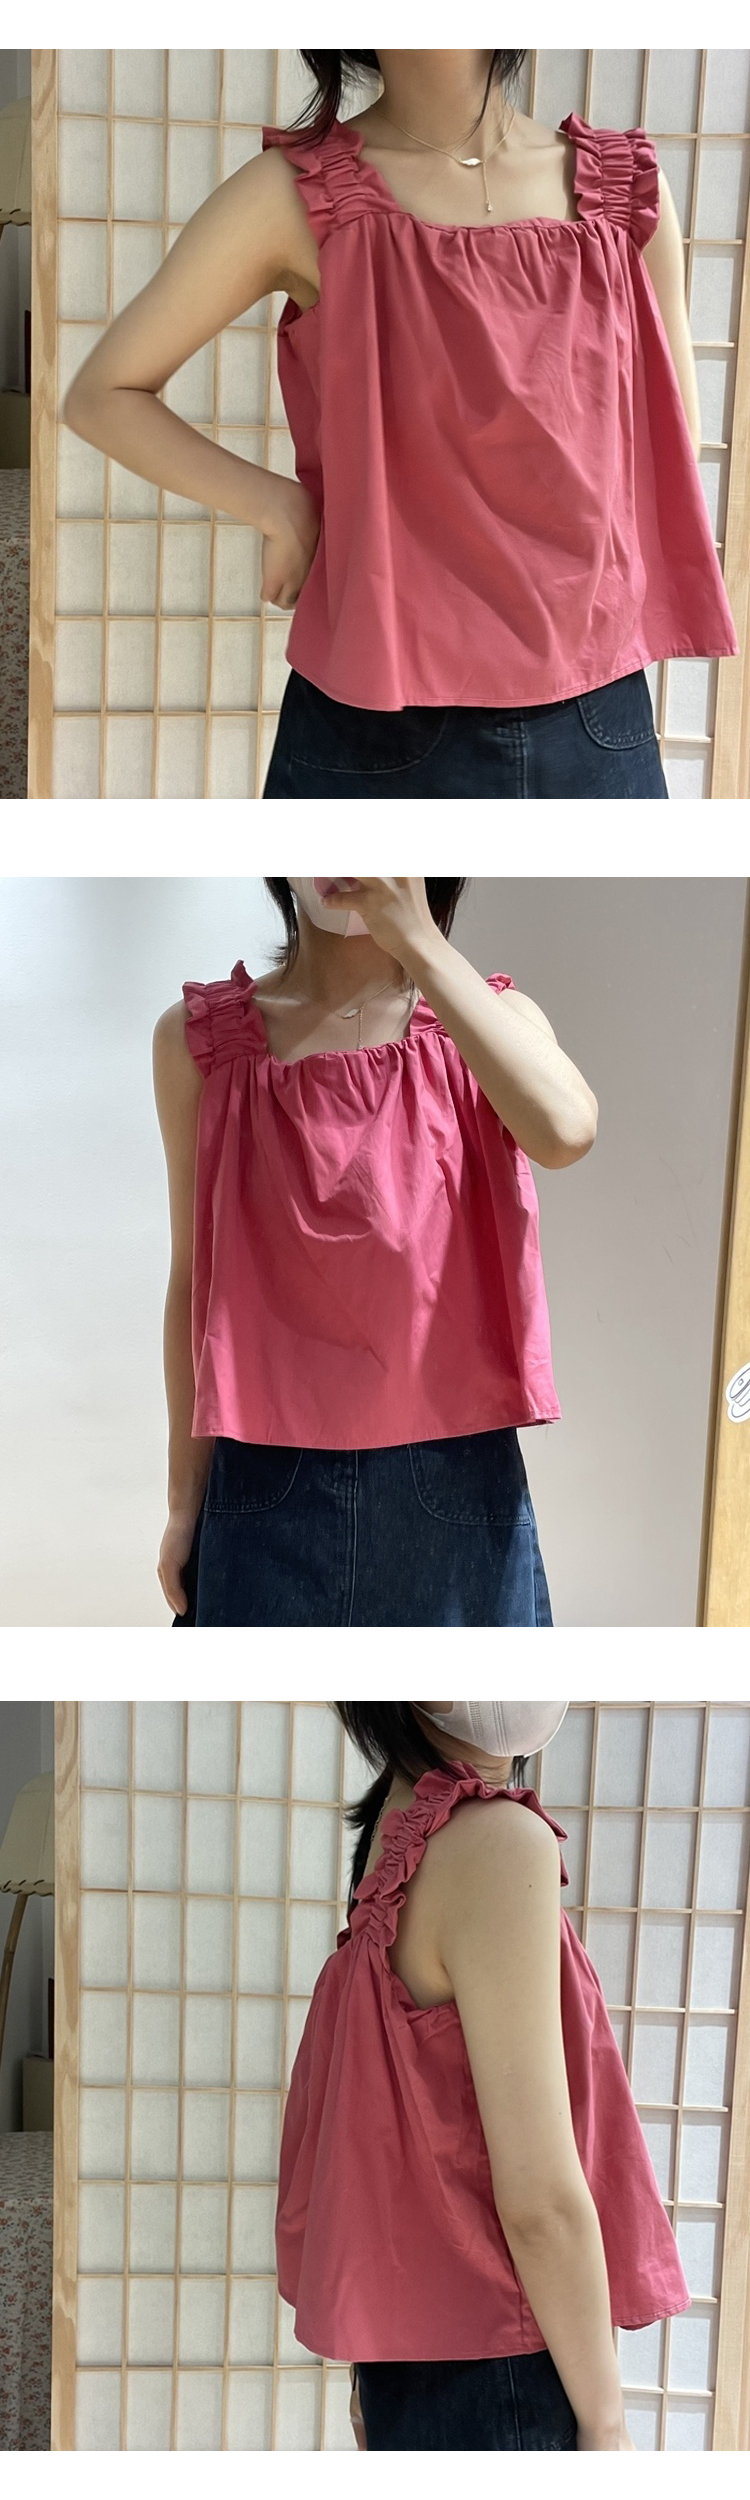 KOIN COLLECTION Square Frill Banding Sleeveless Blouse Pink Color & Free Size 3